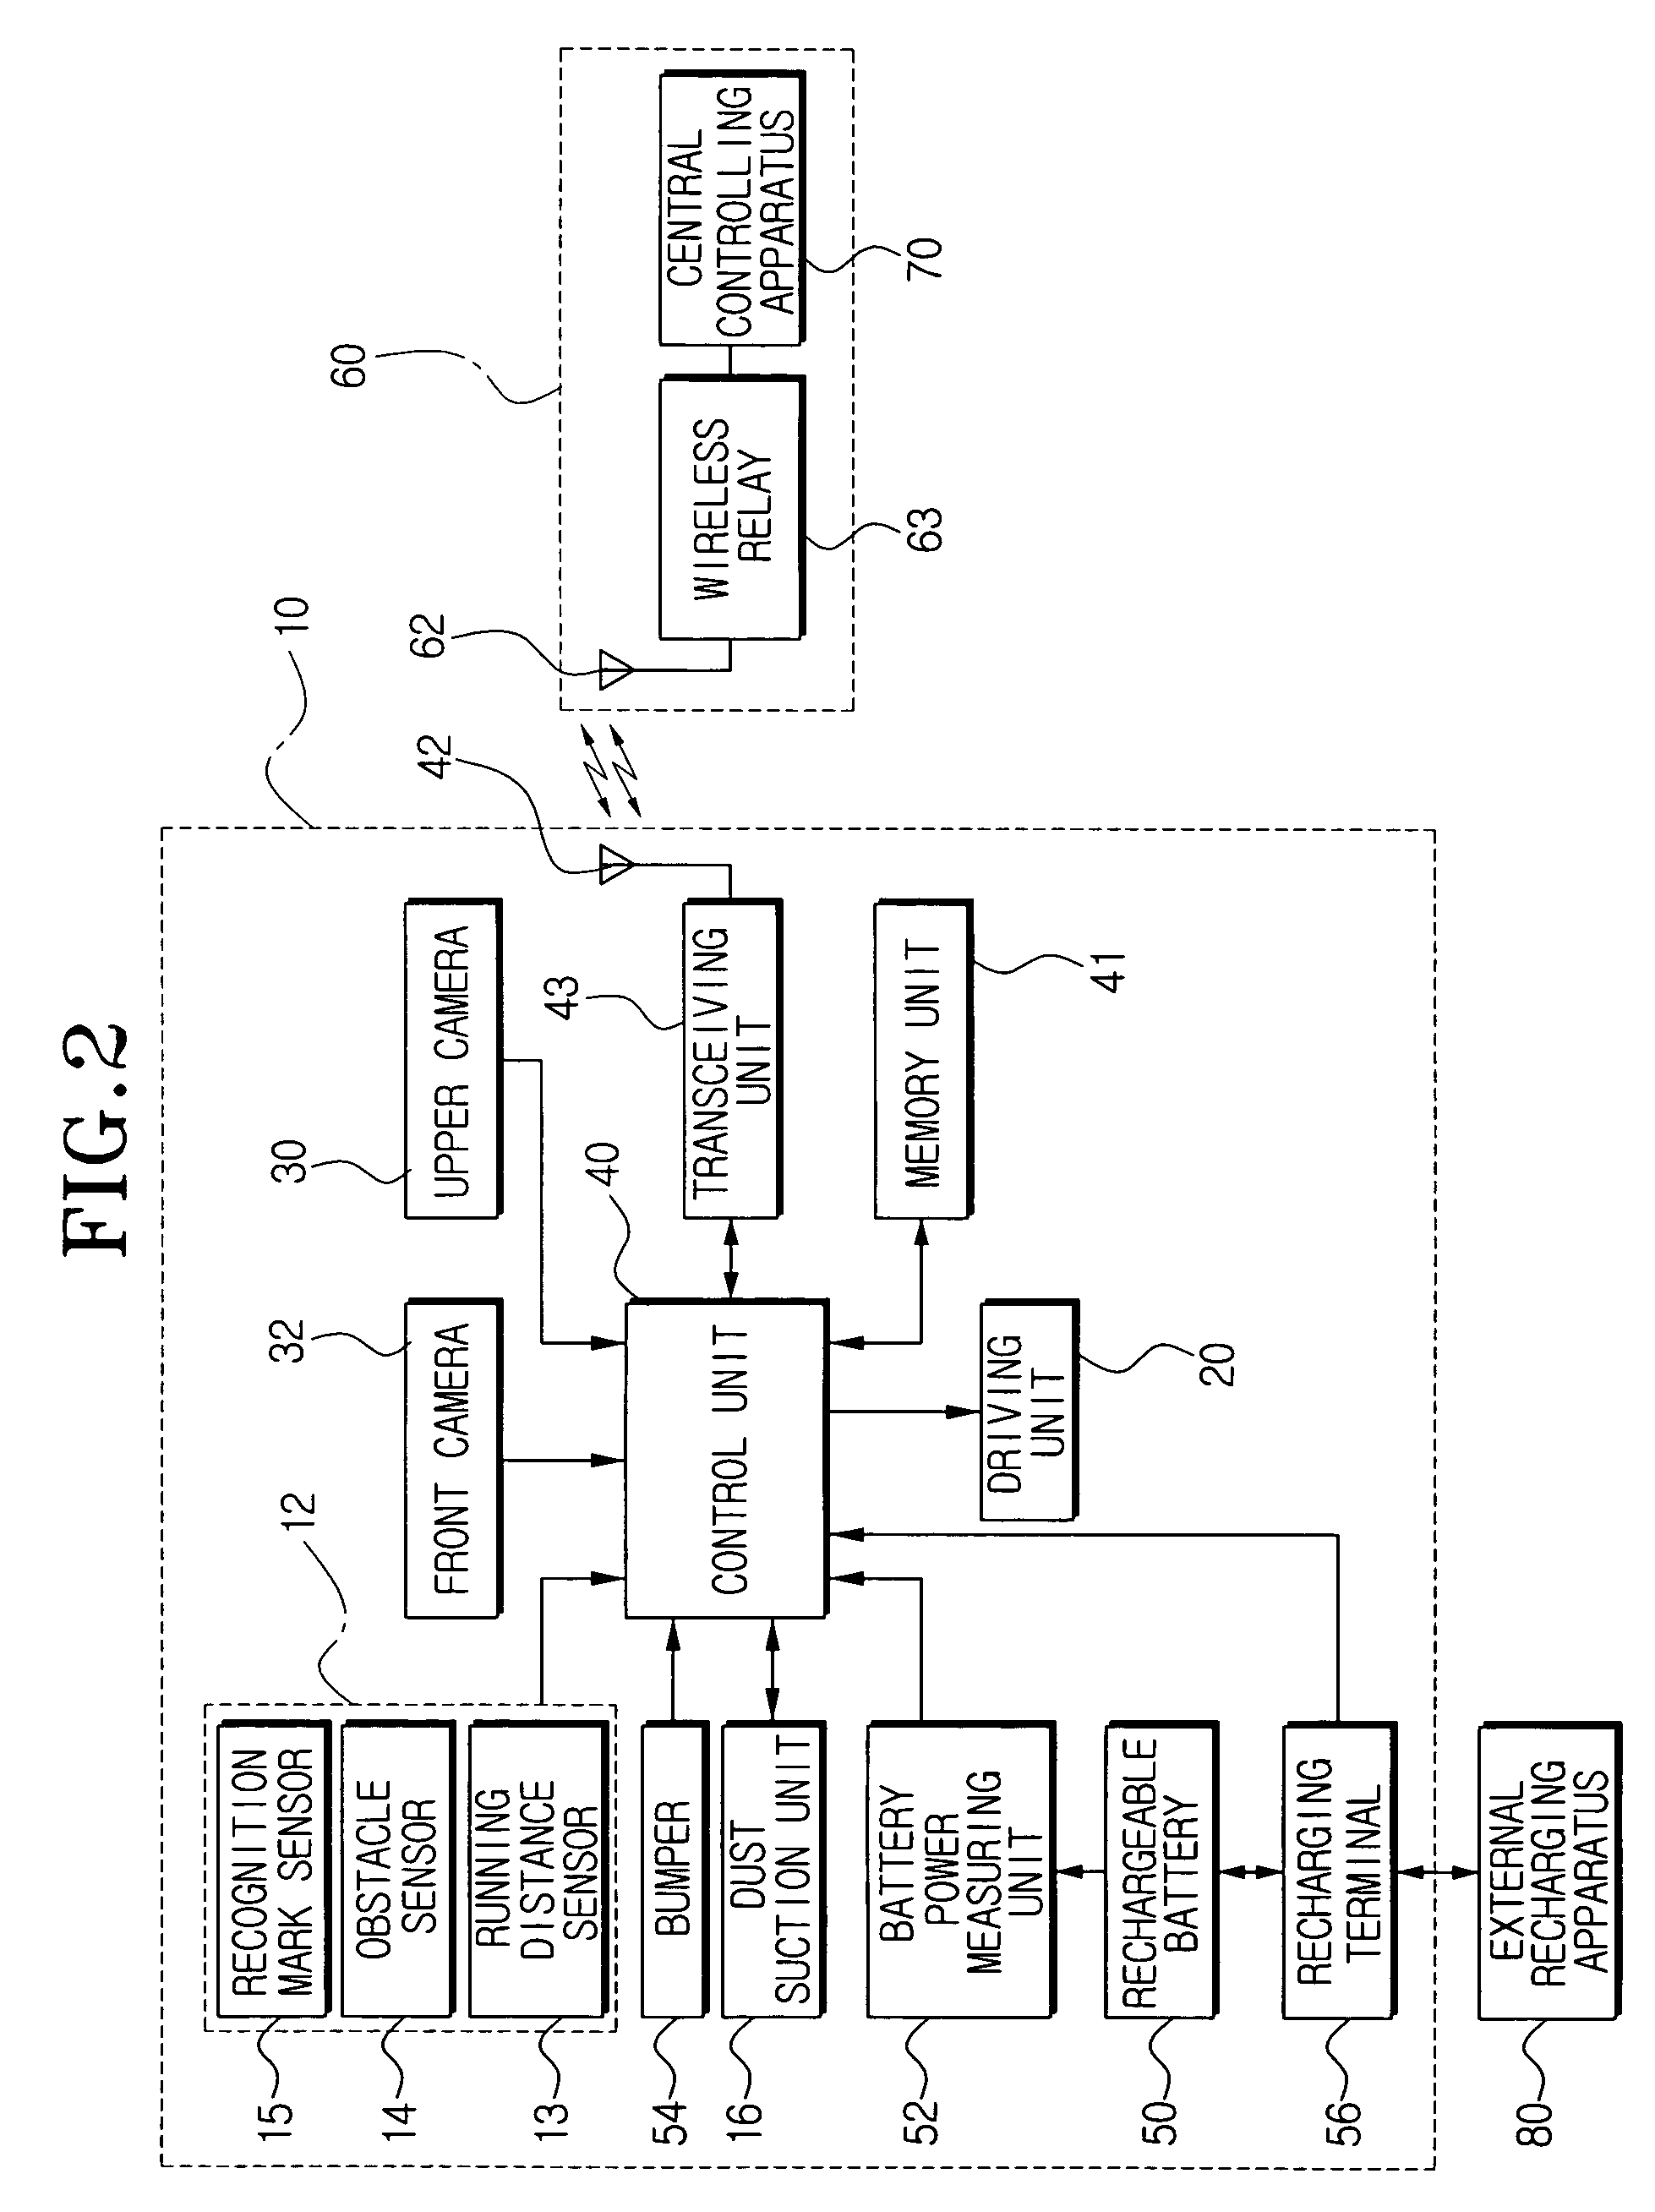 Robot cleaner system having external recharging apparatus and method for docking robot cleaner with external recharging apparatus